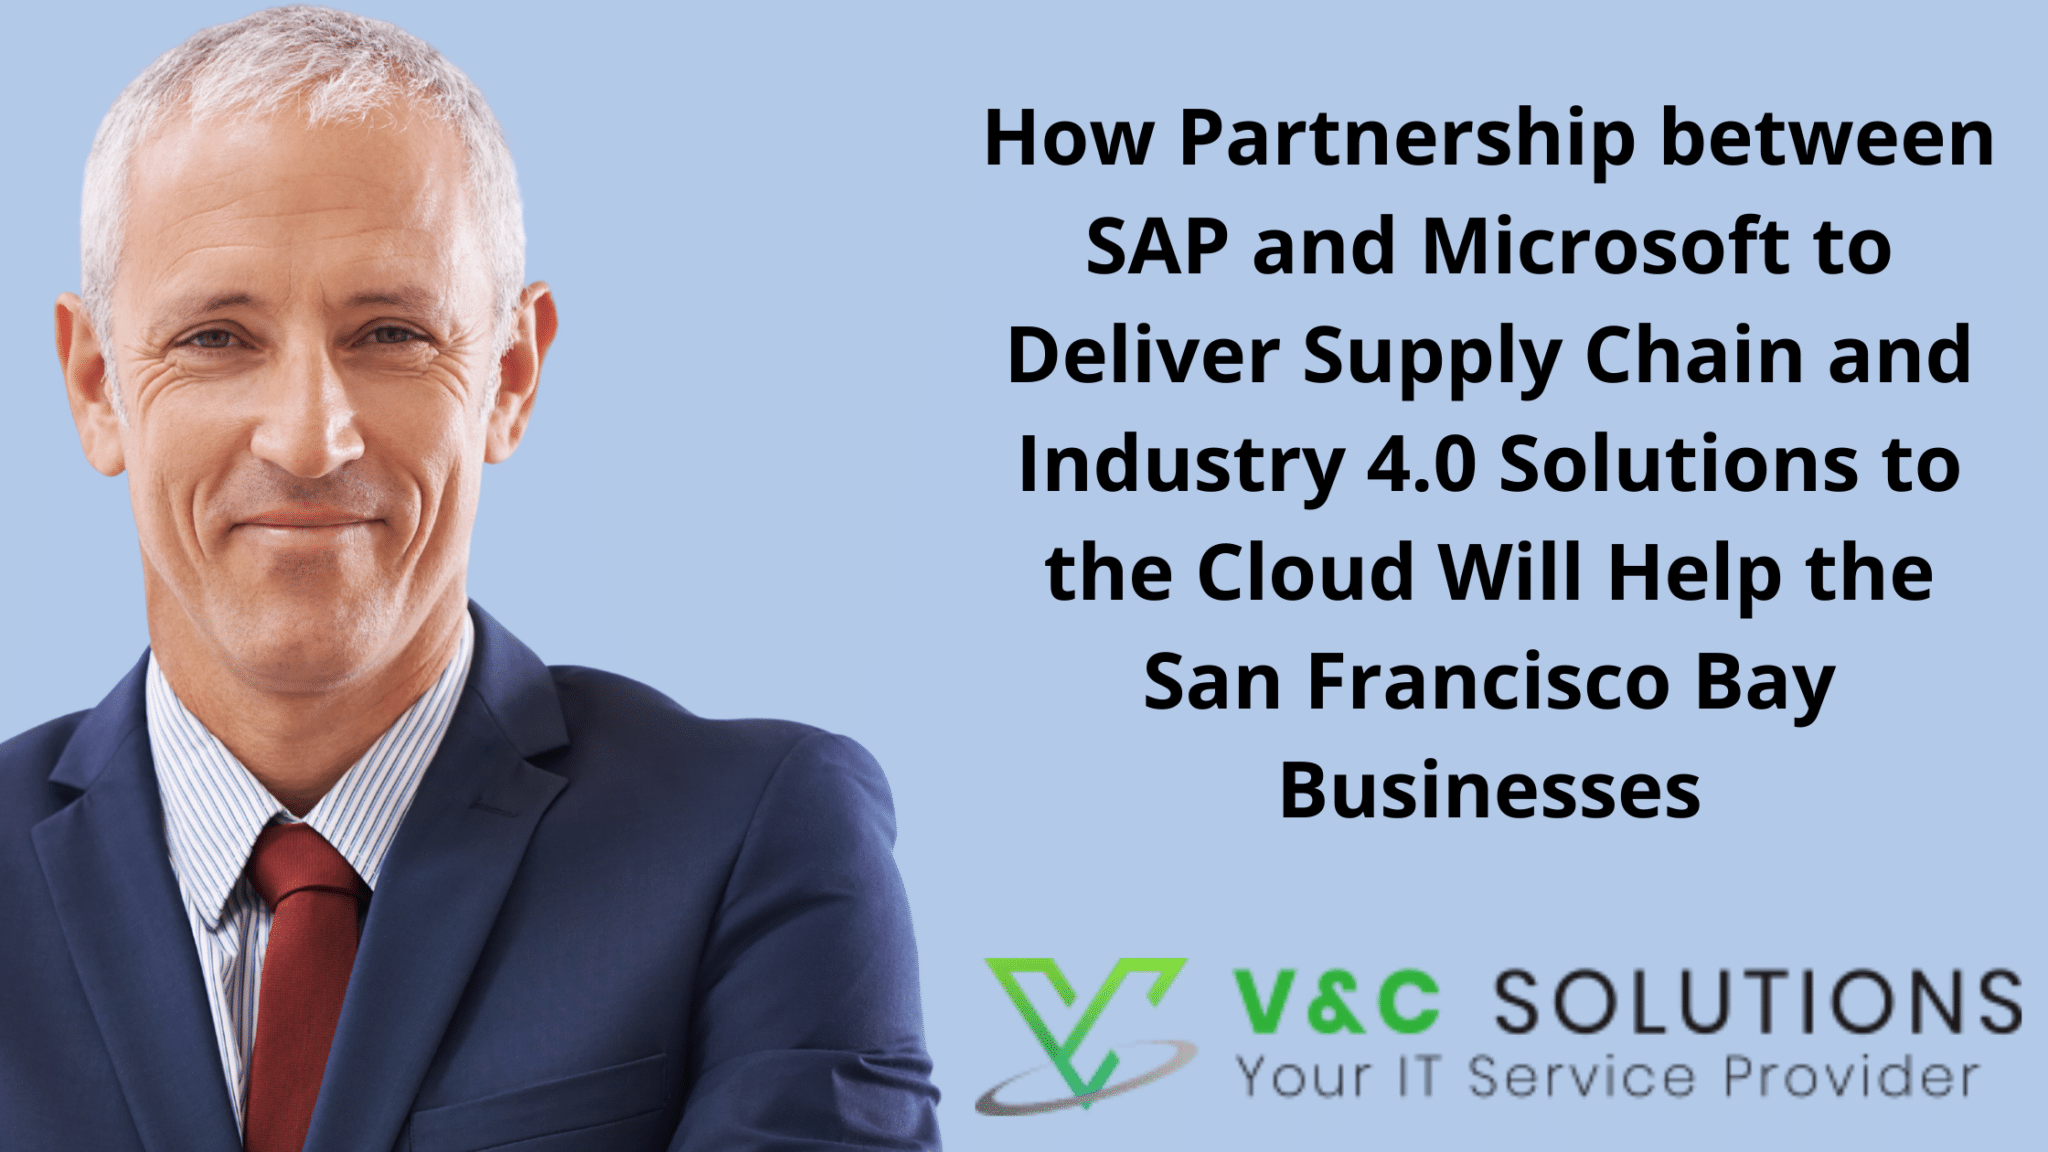 How Partnership between SAP and Microsoft to Deliver Supply Chain and Industry 4.0 Solutions to the Cloud Will Help the San Francisco Bay Businesses